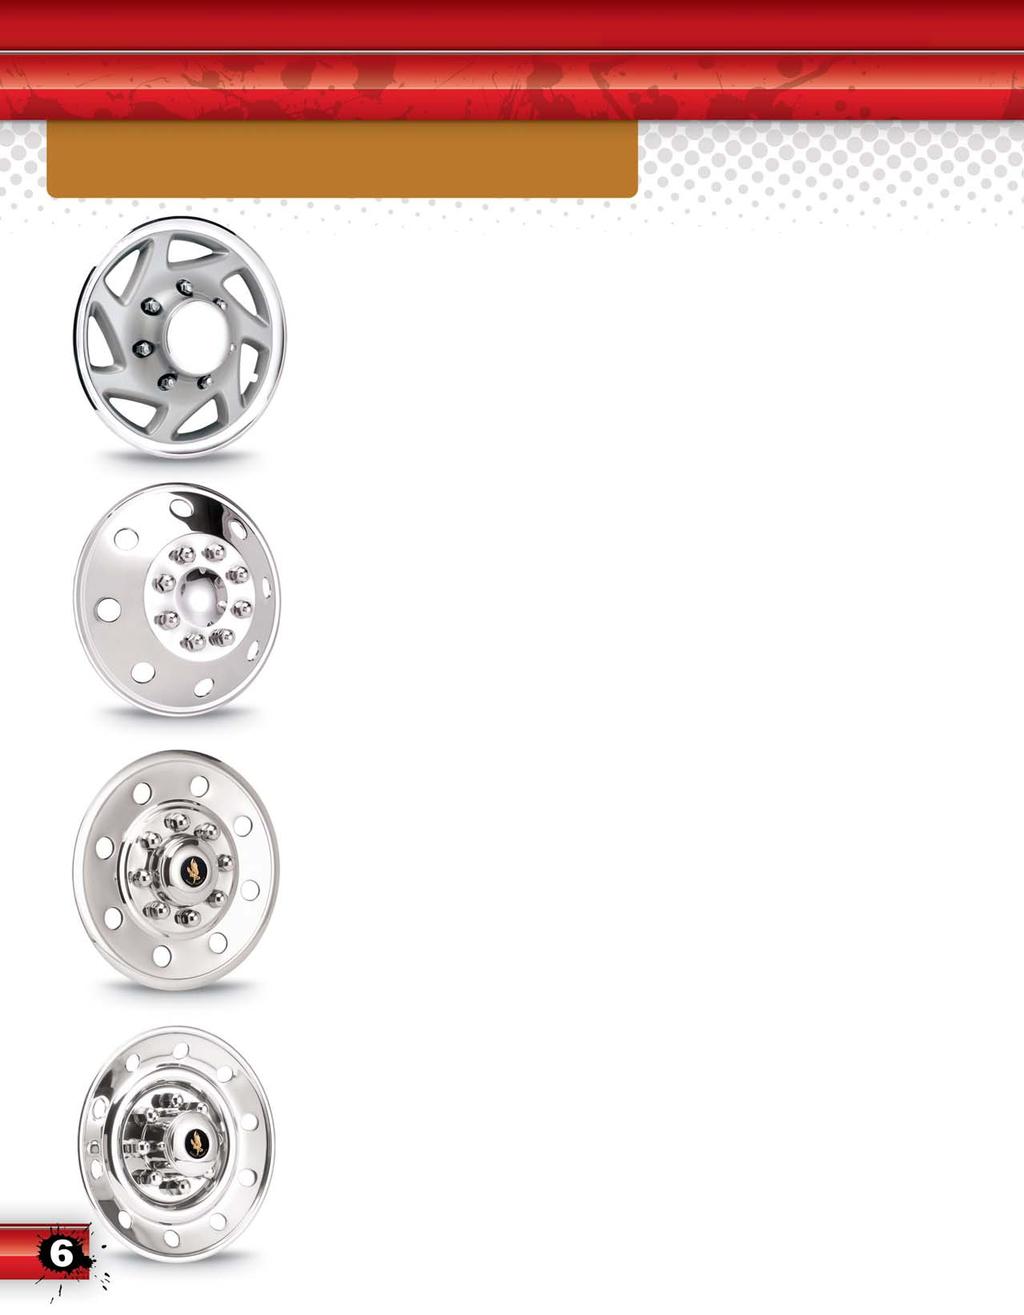 Single Wheel and Sprinter Wheel Simulators 9494-15 15 Silver ABS Wheel Cover with Chrome Ring and Lug nuts 9494-16 16 Silver ABS Deep Center Wheel Cover with Chrome Ring and Lug nuts (floating axle)